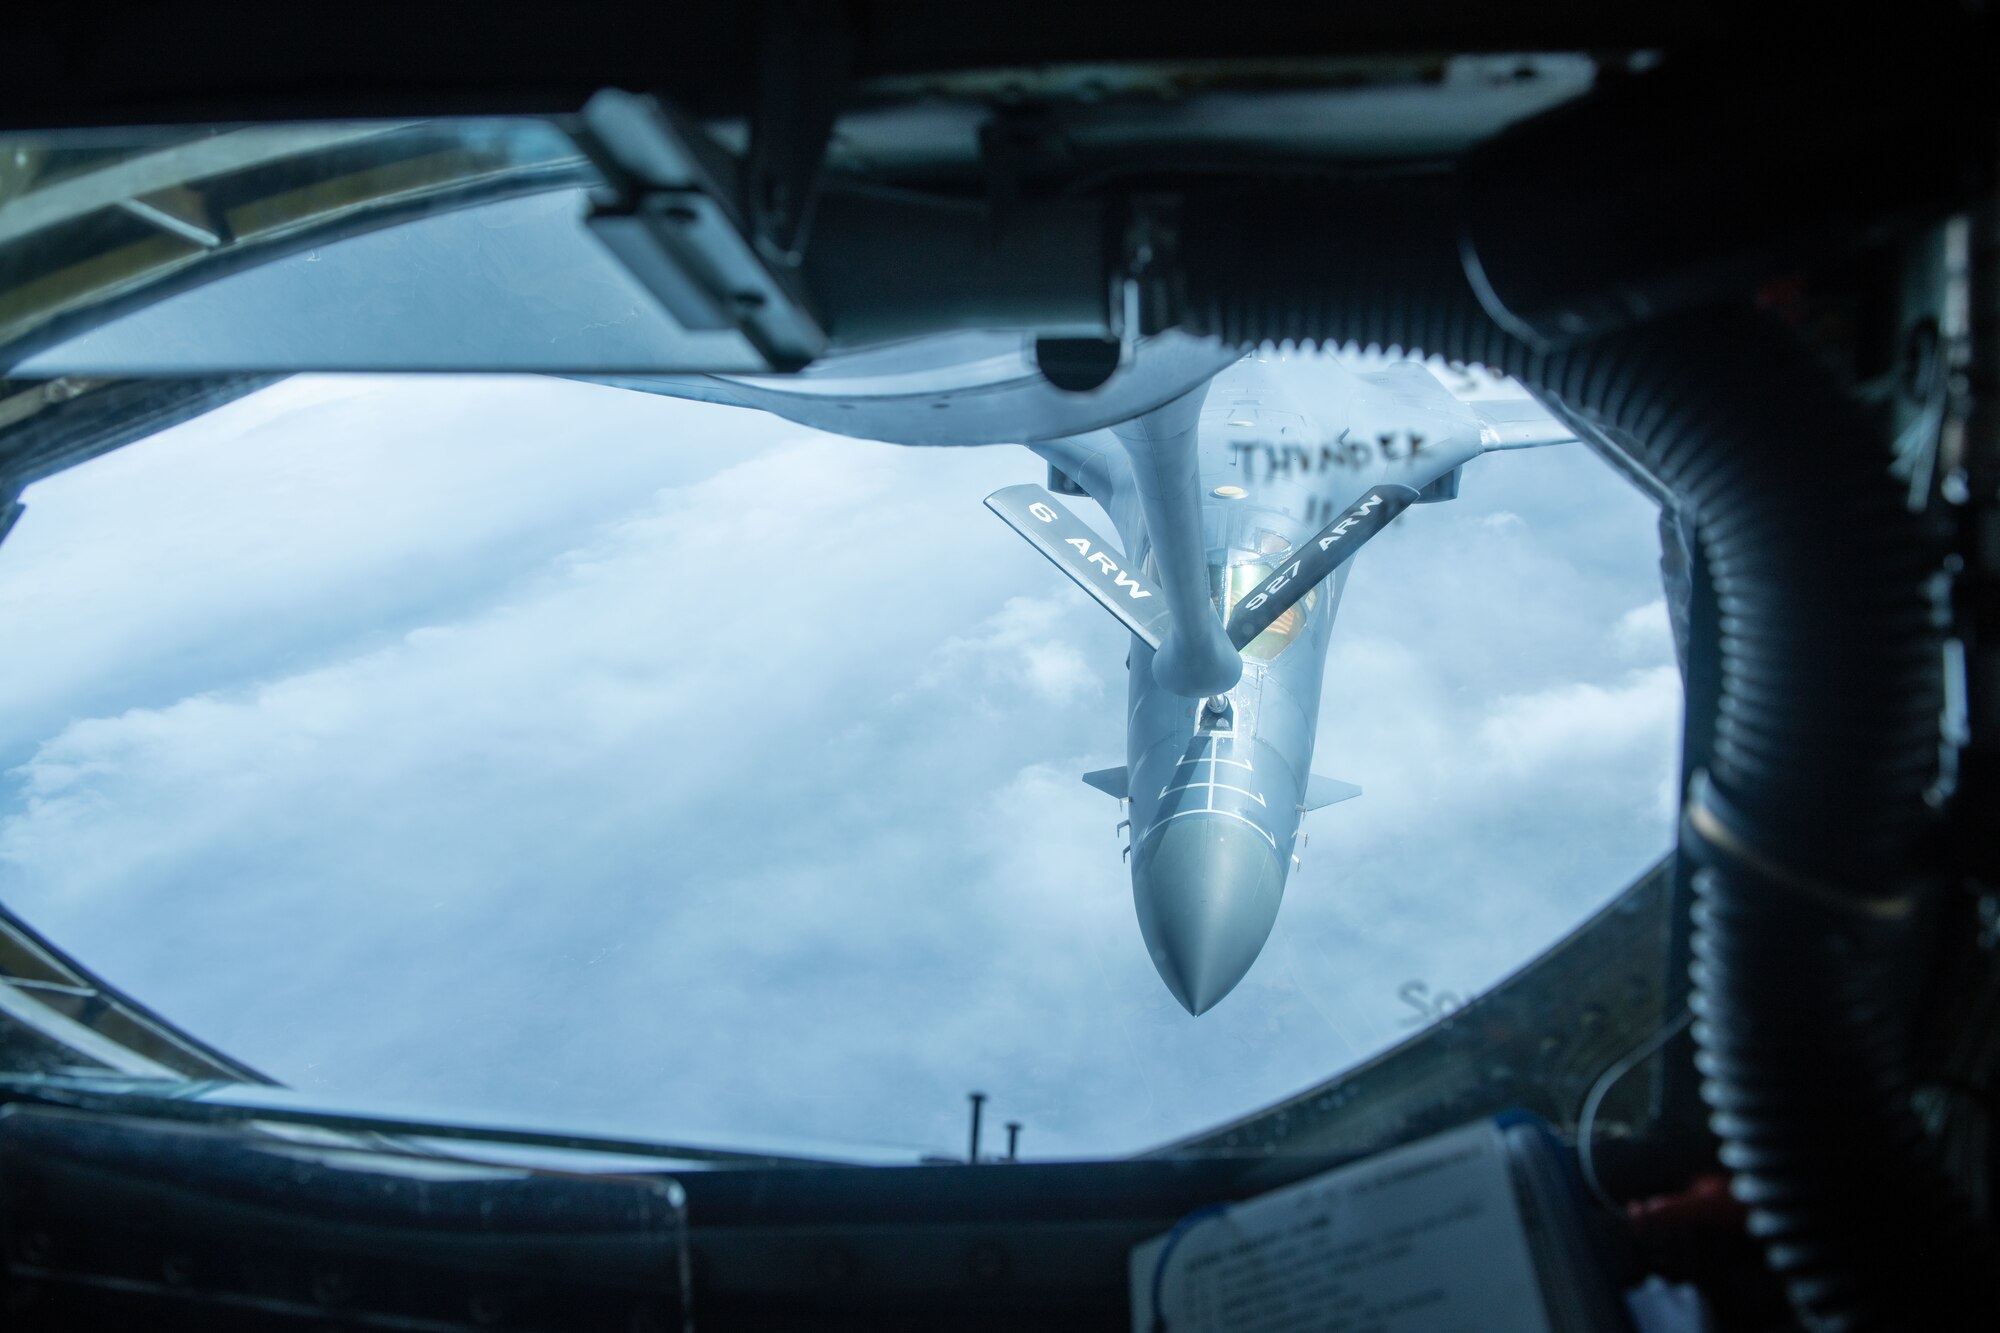 A B-1B Lancer refuels mid-flight from a KC-135 Stratotanker over the Powder River Training Complex, S.D., April 19, 2022. Air crews from Ellsworth Air Force Base and MacDill Air Force Base conducted airborne re-fueling exercises to mutually hone cooperative aviation skills. (U.S. Air Force photo by Airman 1st Class Adam Olson)